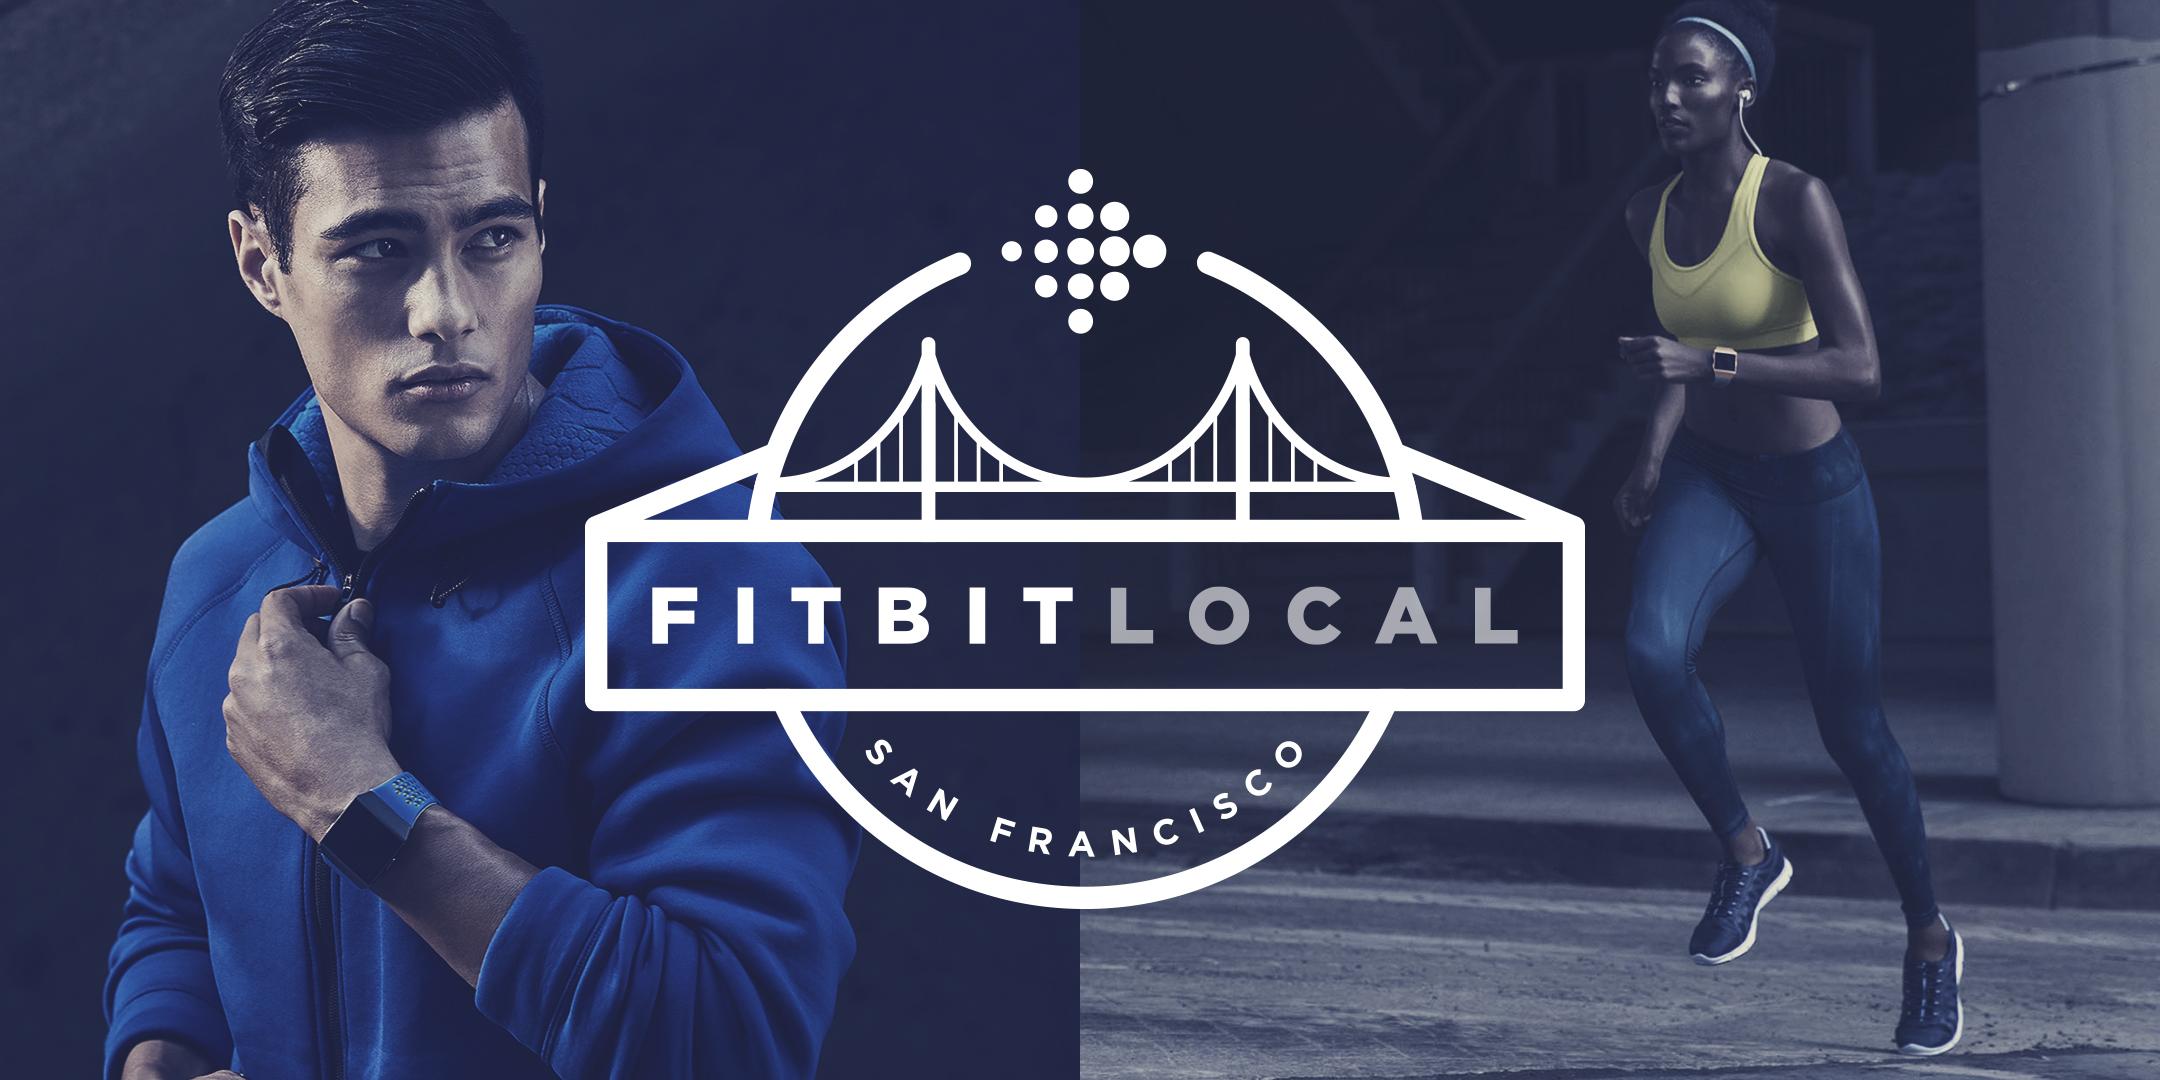 Ferry Building Fitness Fun With Fitbit